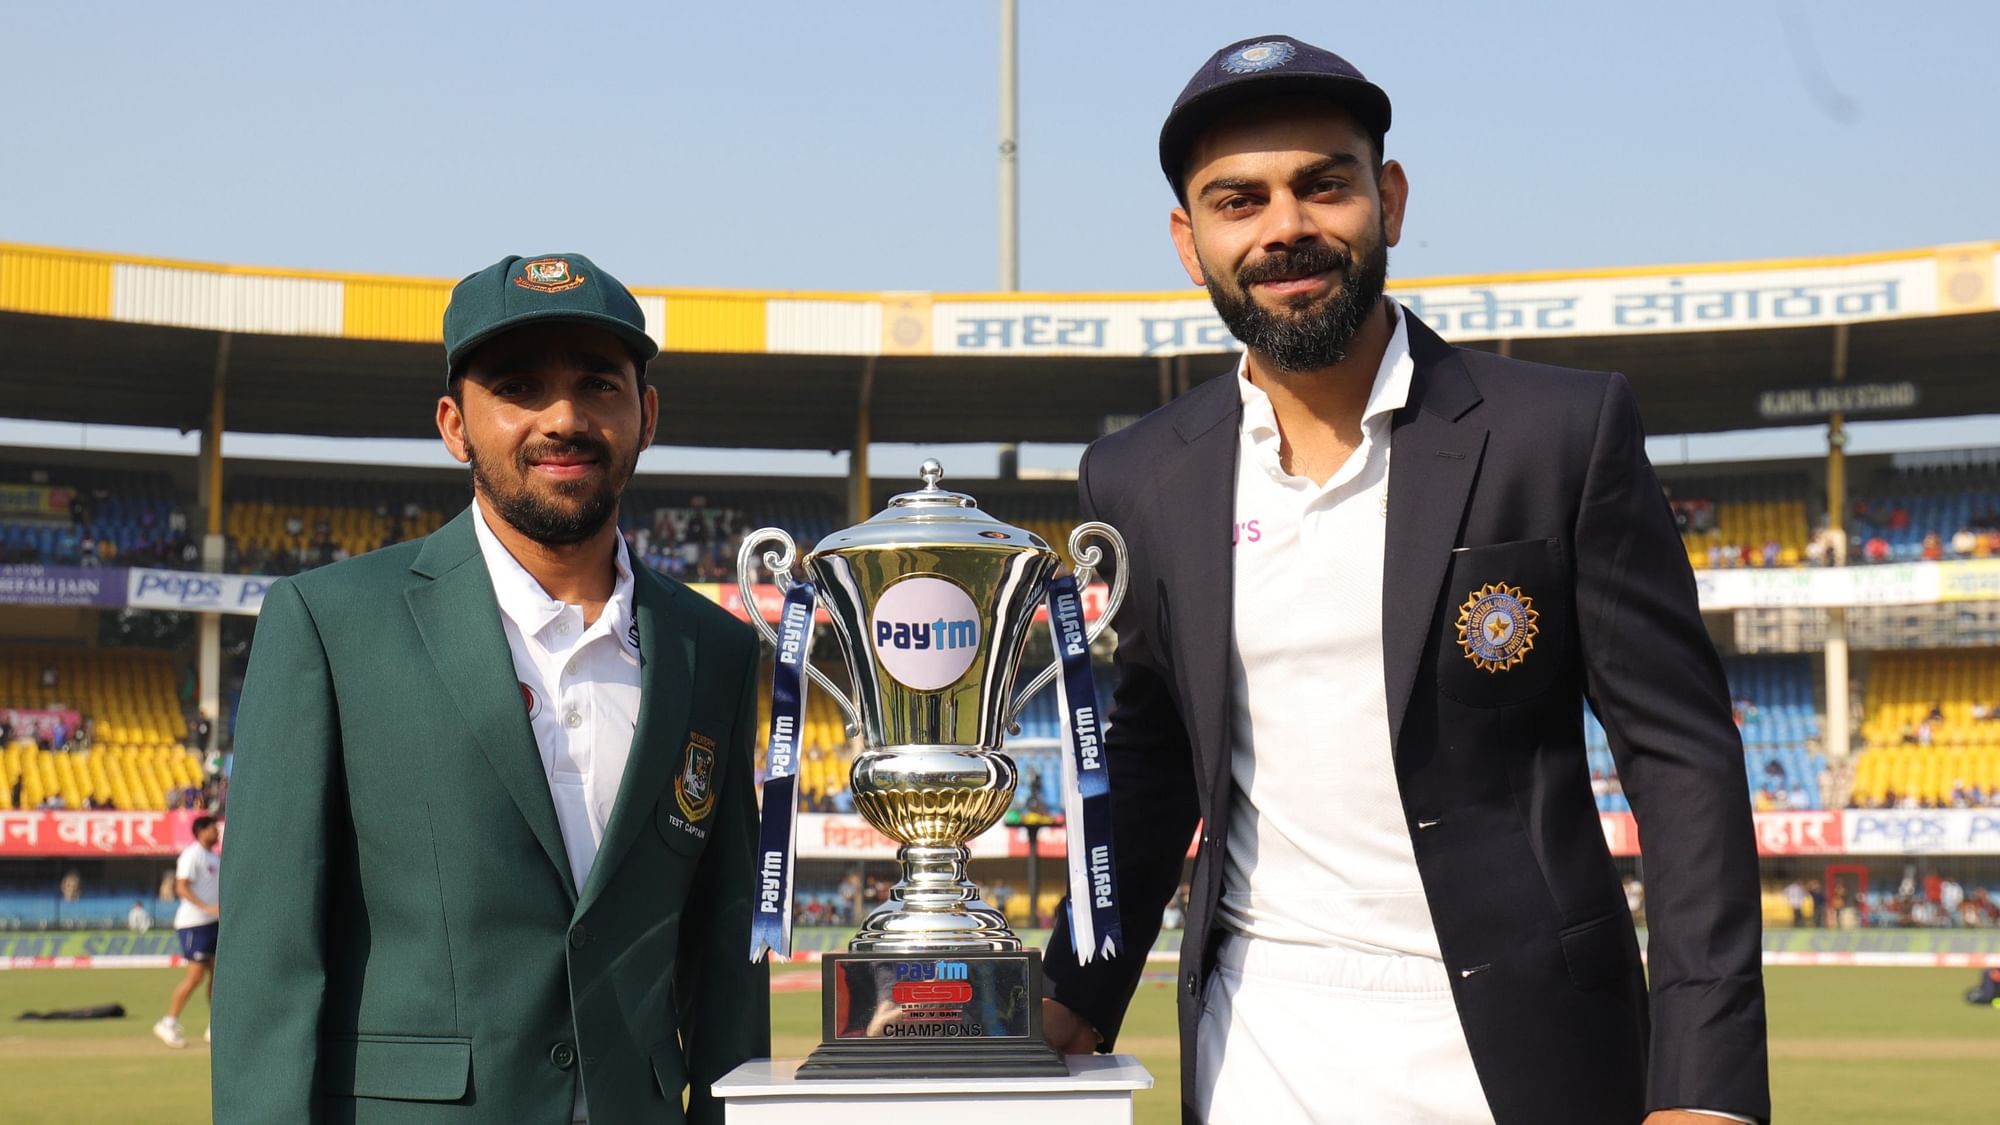 Bangladesh captain Mominul Haque won the toss and elected to bat against India in both the teams’ maiden Day/Night Test.